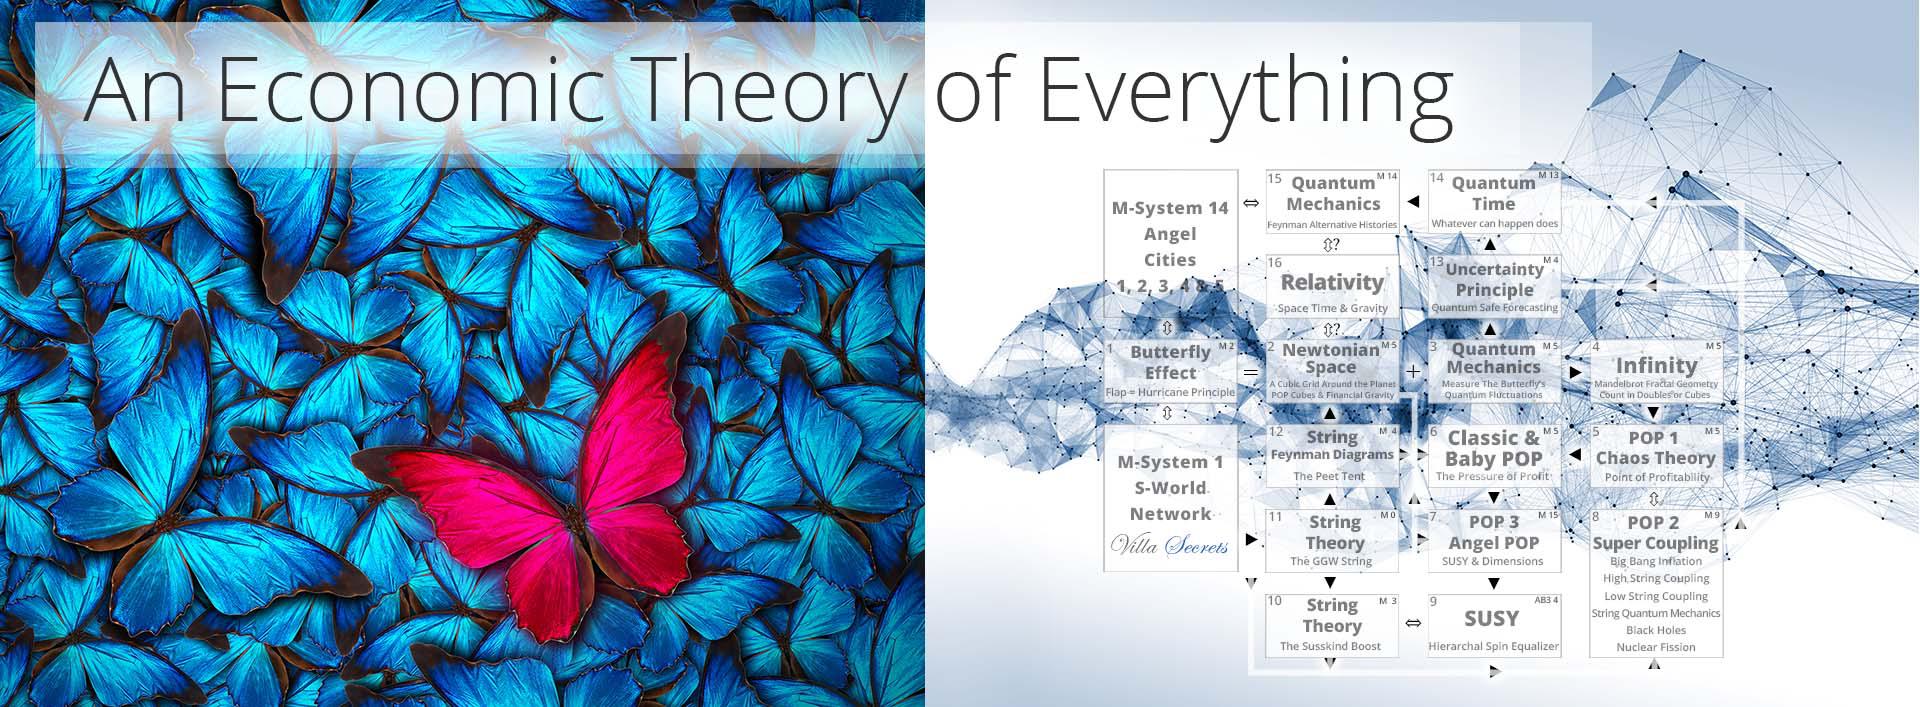 An Economic Theory of Everything - Chapter 2.2